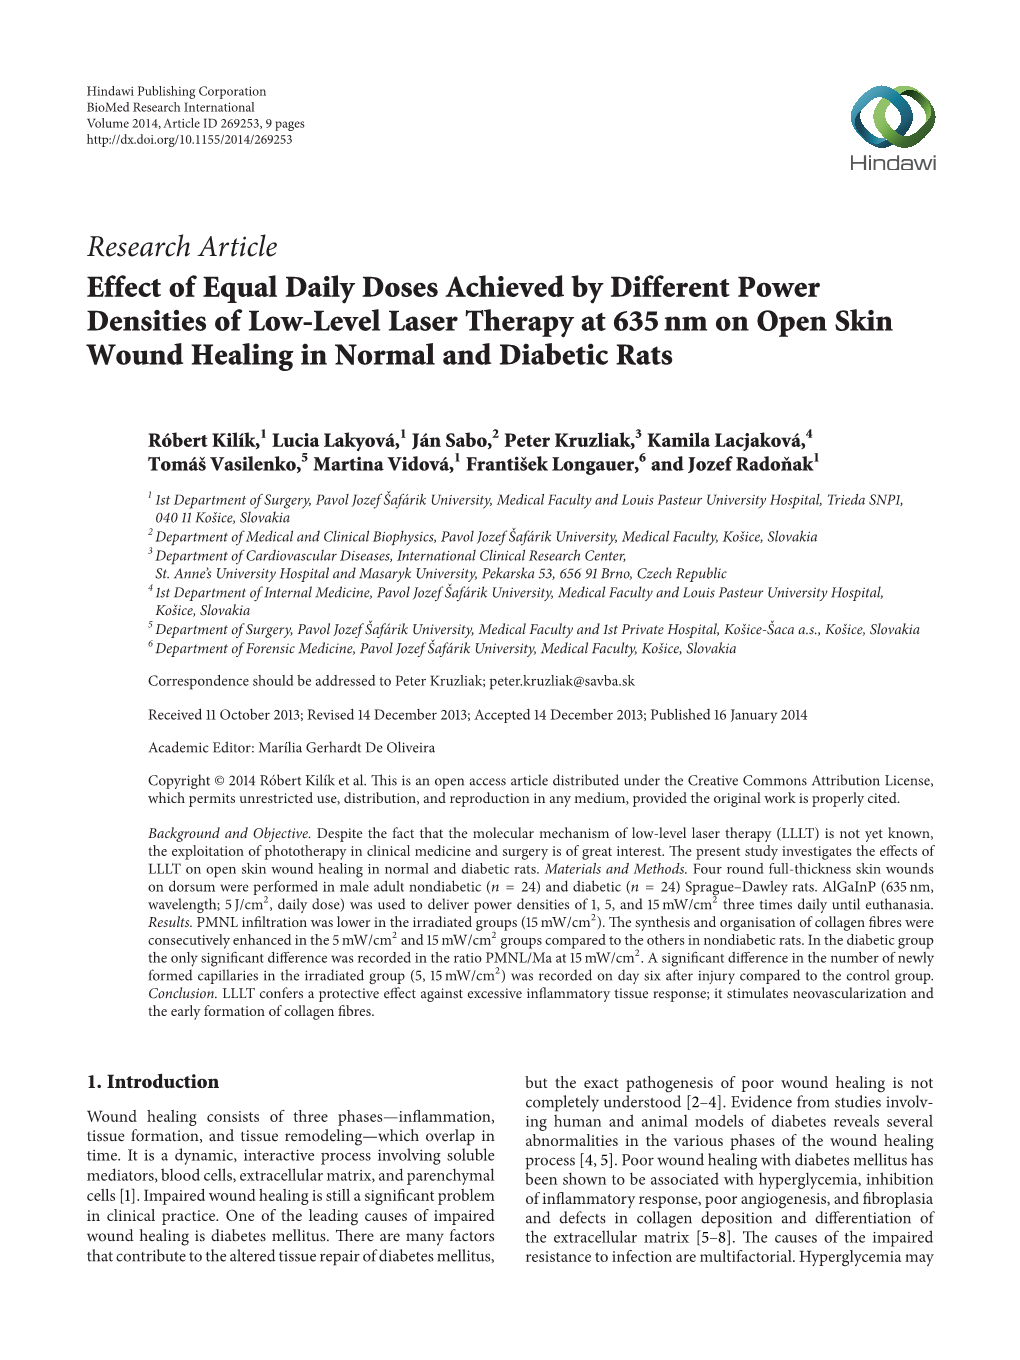 Effect of Equal Daily Doses Achieved by Different Power Densities of Low-Level Laser Therapy at 635 Nm on Open Skin Wound Healing in Normal and Diabetic Rats